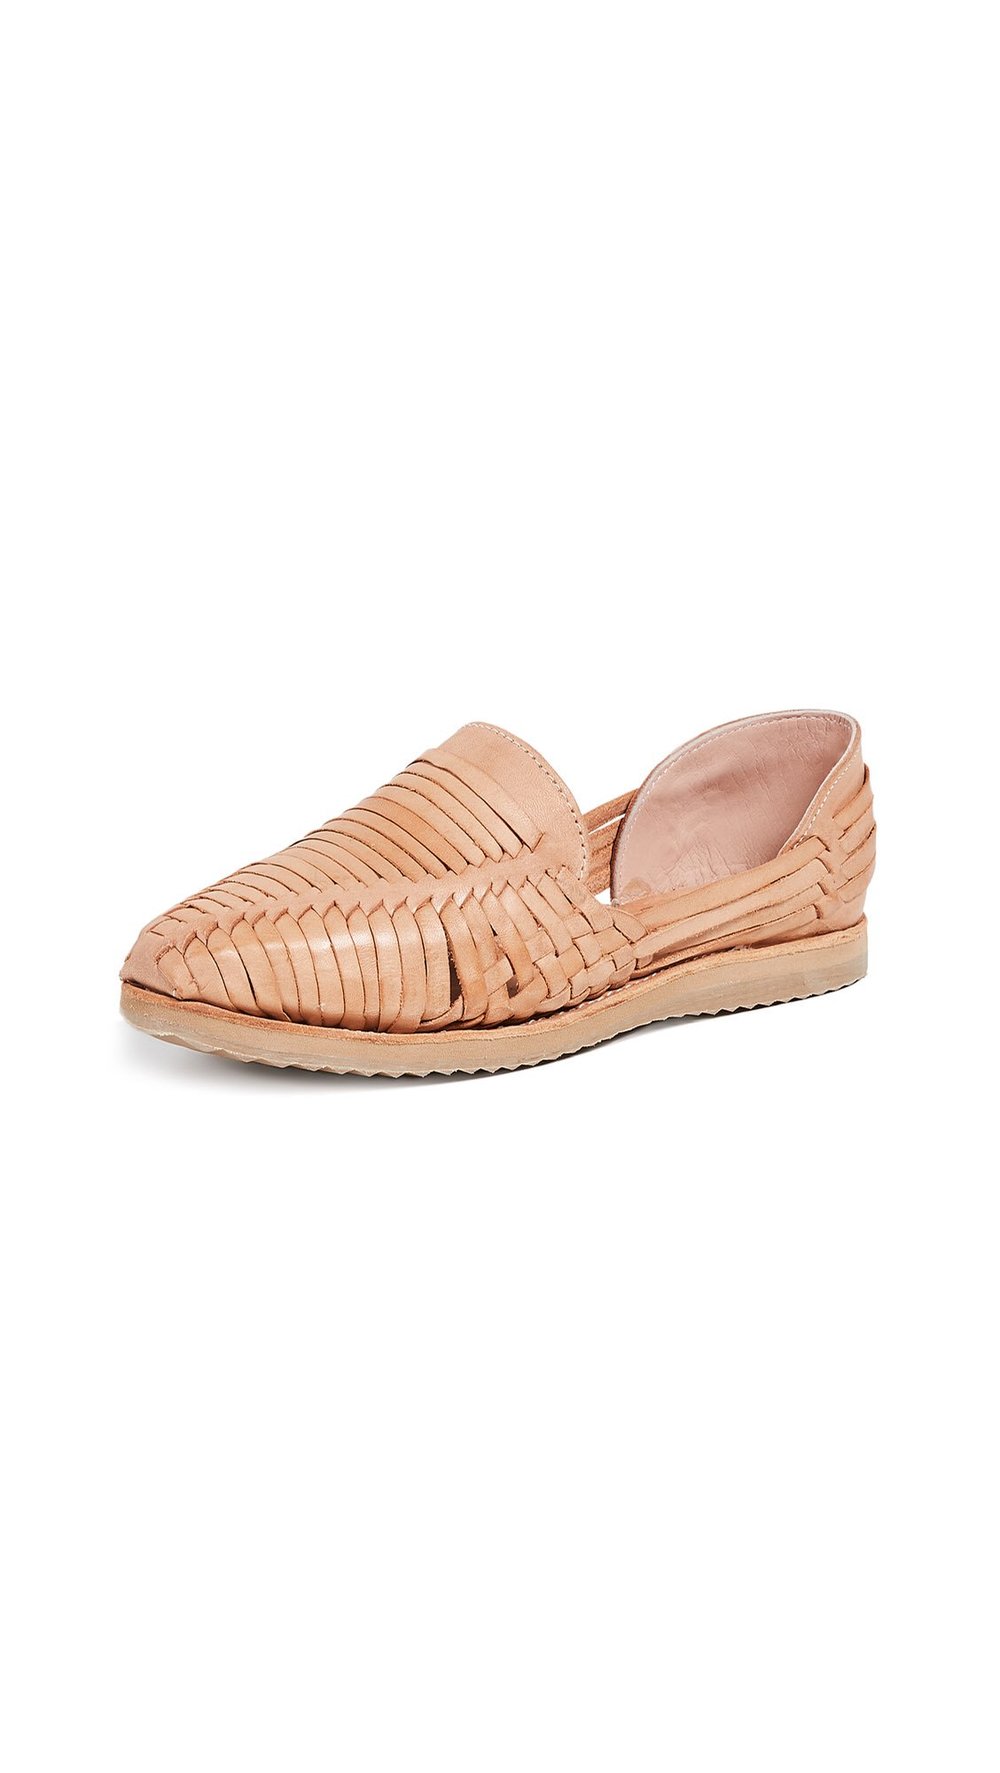 Brother Vellies Huaraches Flats in Whiskey — UFO No More